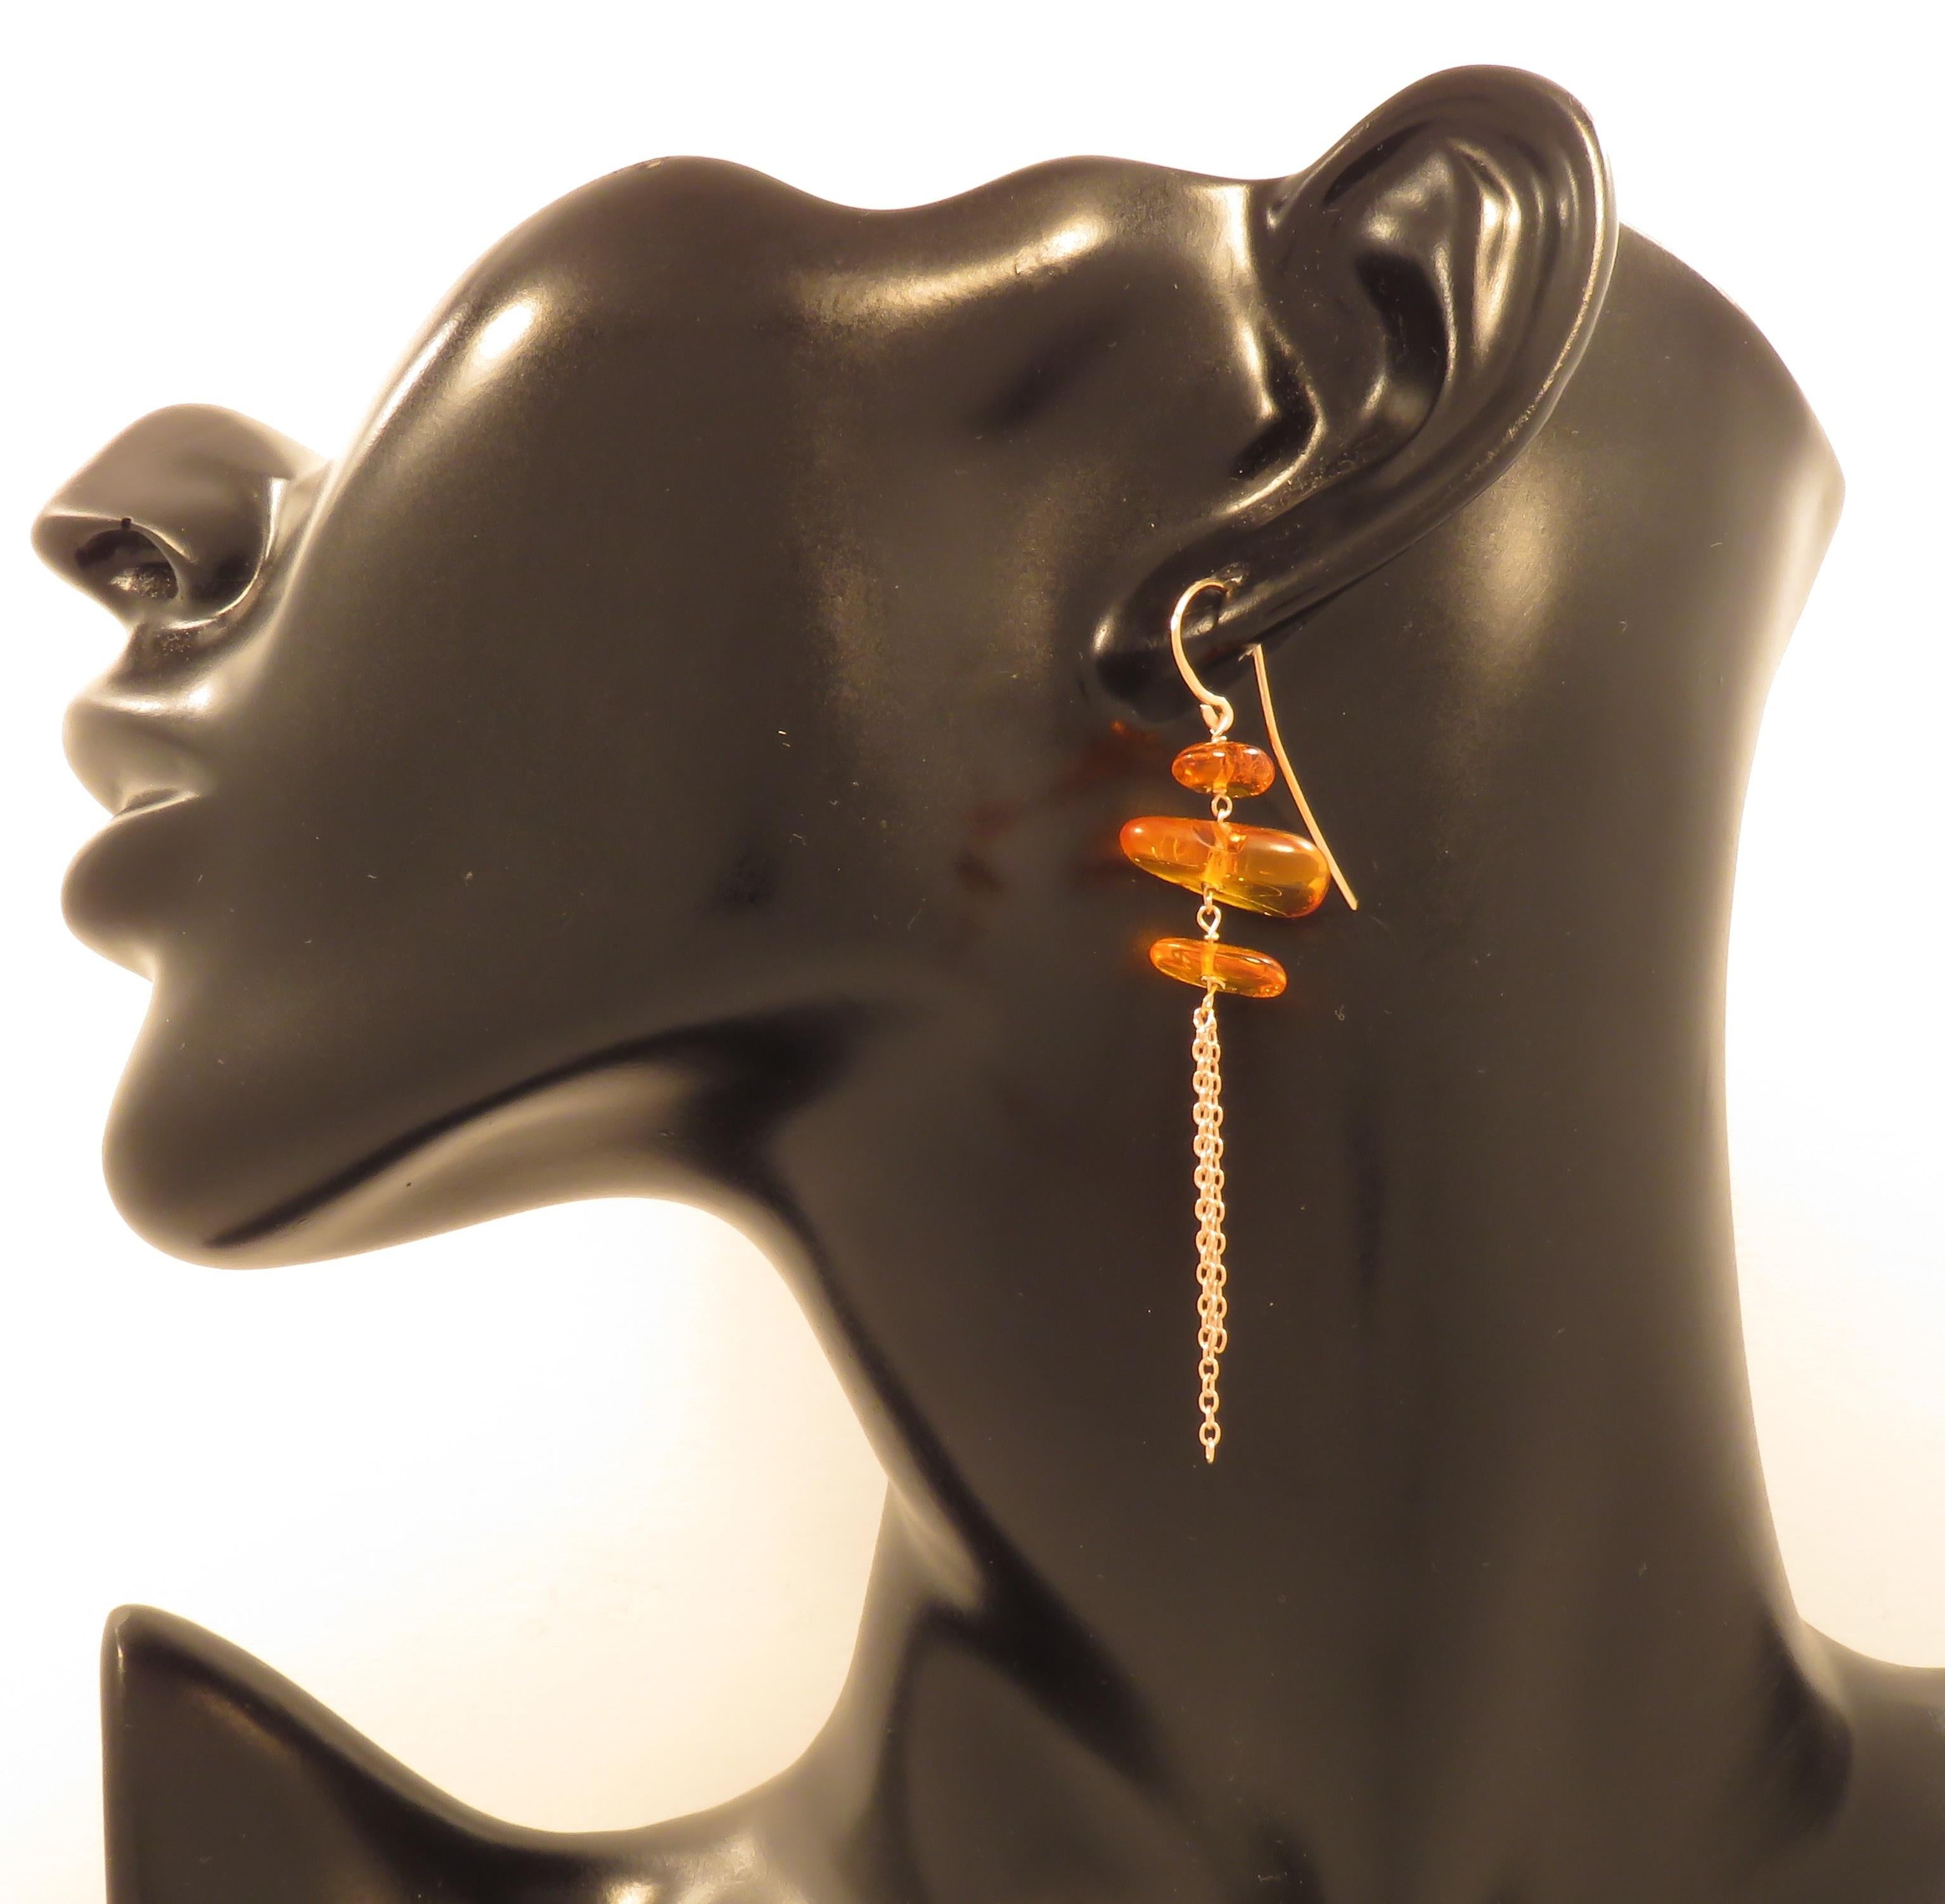 Lovely dangle earrings with 6 nugget cut amber gems and rolo chain handmade in 9 karat rose gold. The length of each earring is 60 mm / 2.362 inches. Marked with the Italian gold mark 375 and Botta Gioielli brandmark 716MI.
Search Ref: